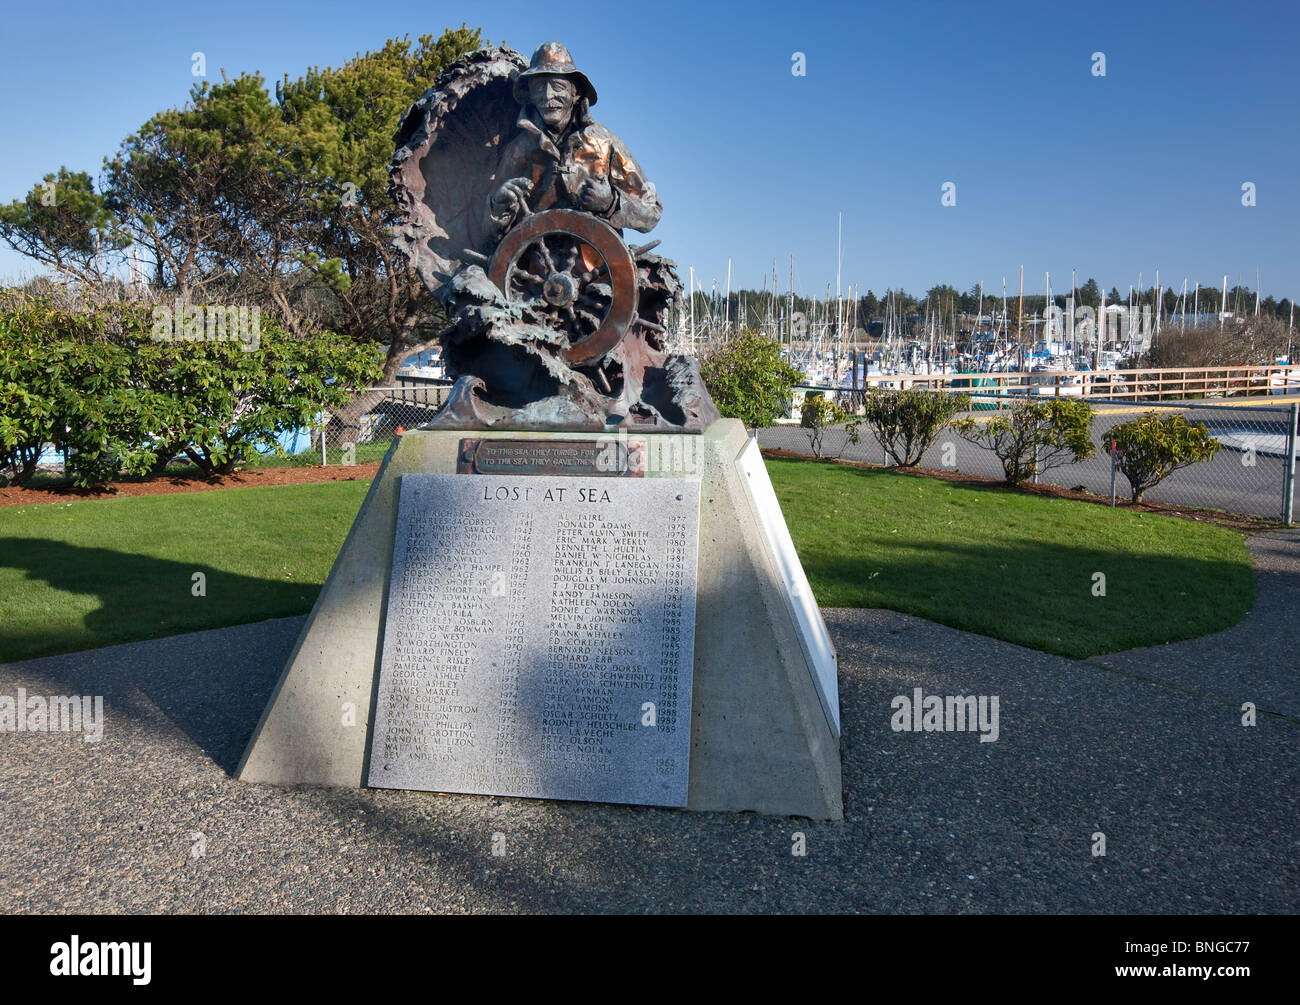 Statue for lost at sea persons at Charleston harbor, Oregon Stock Photo